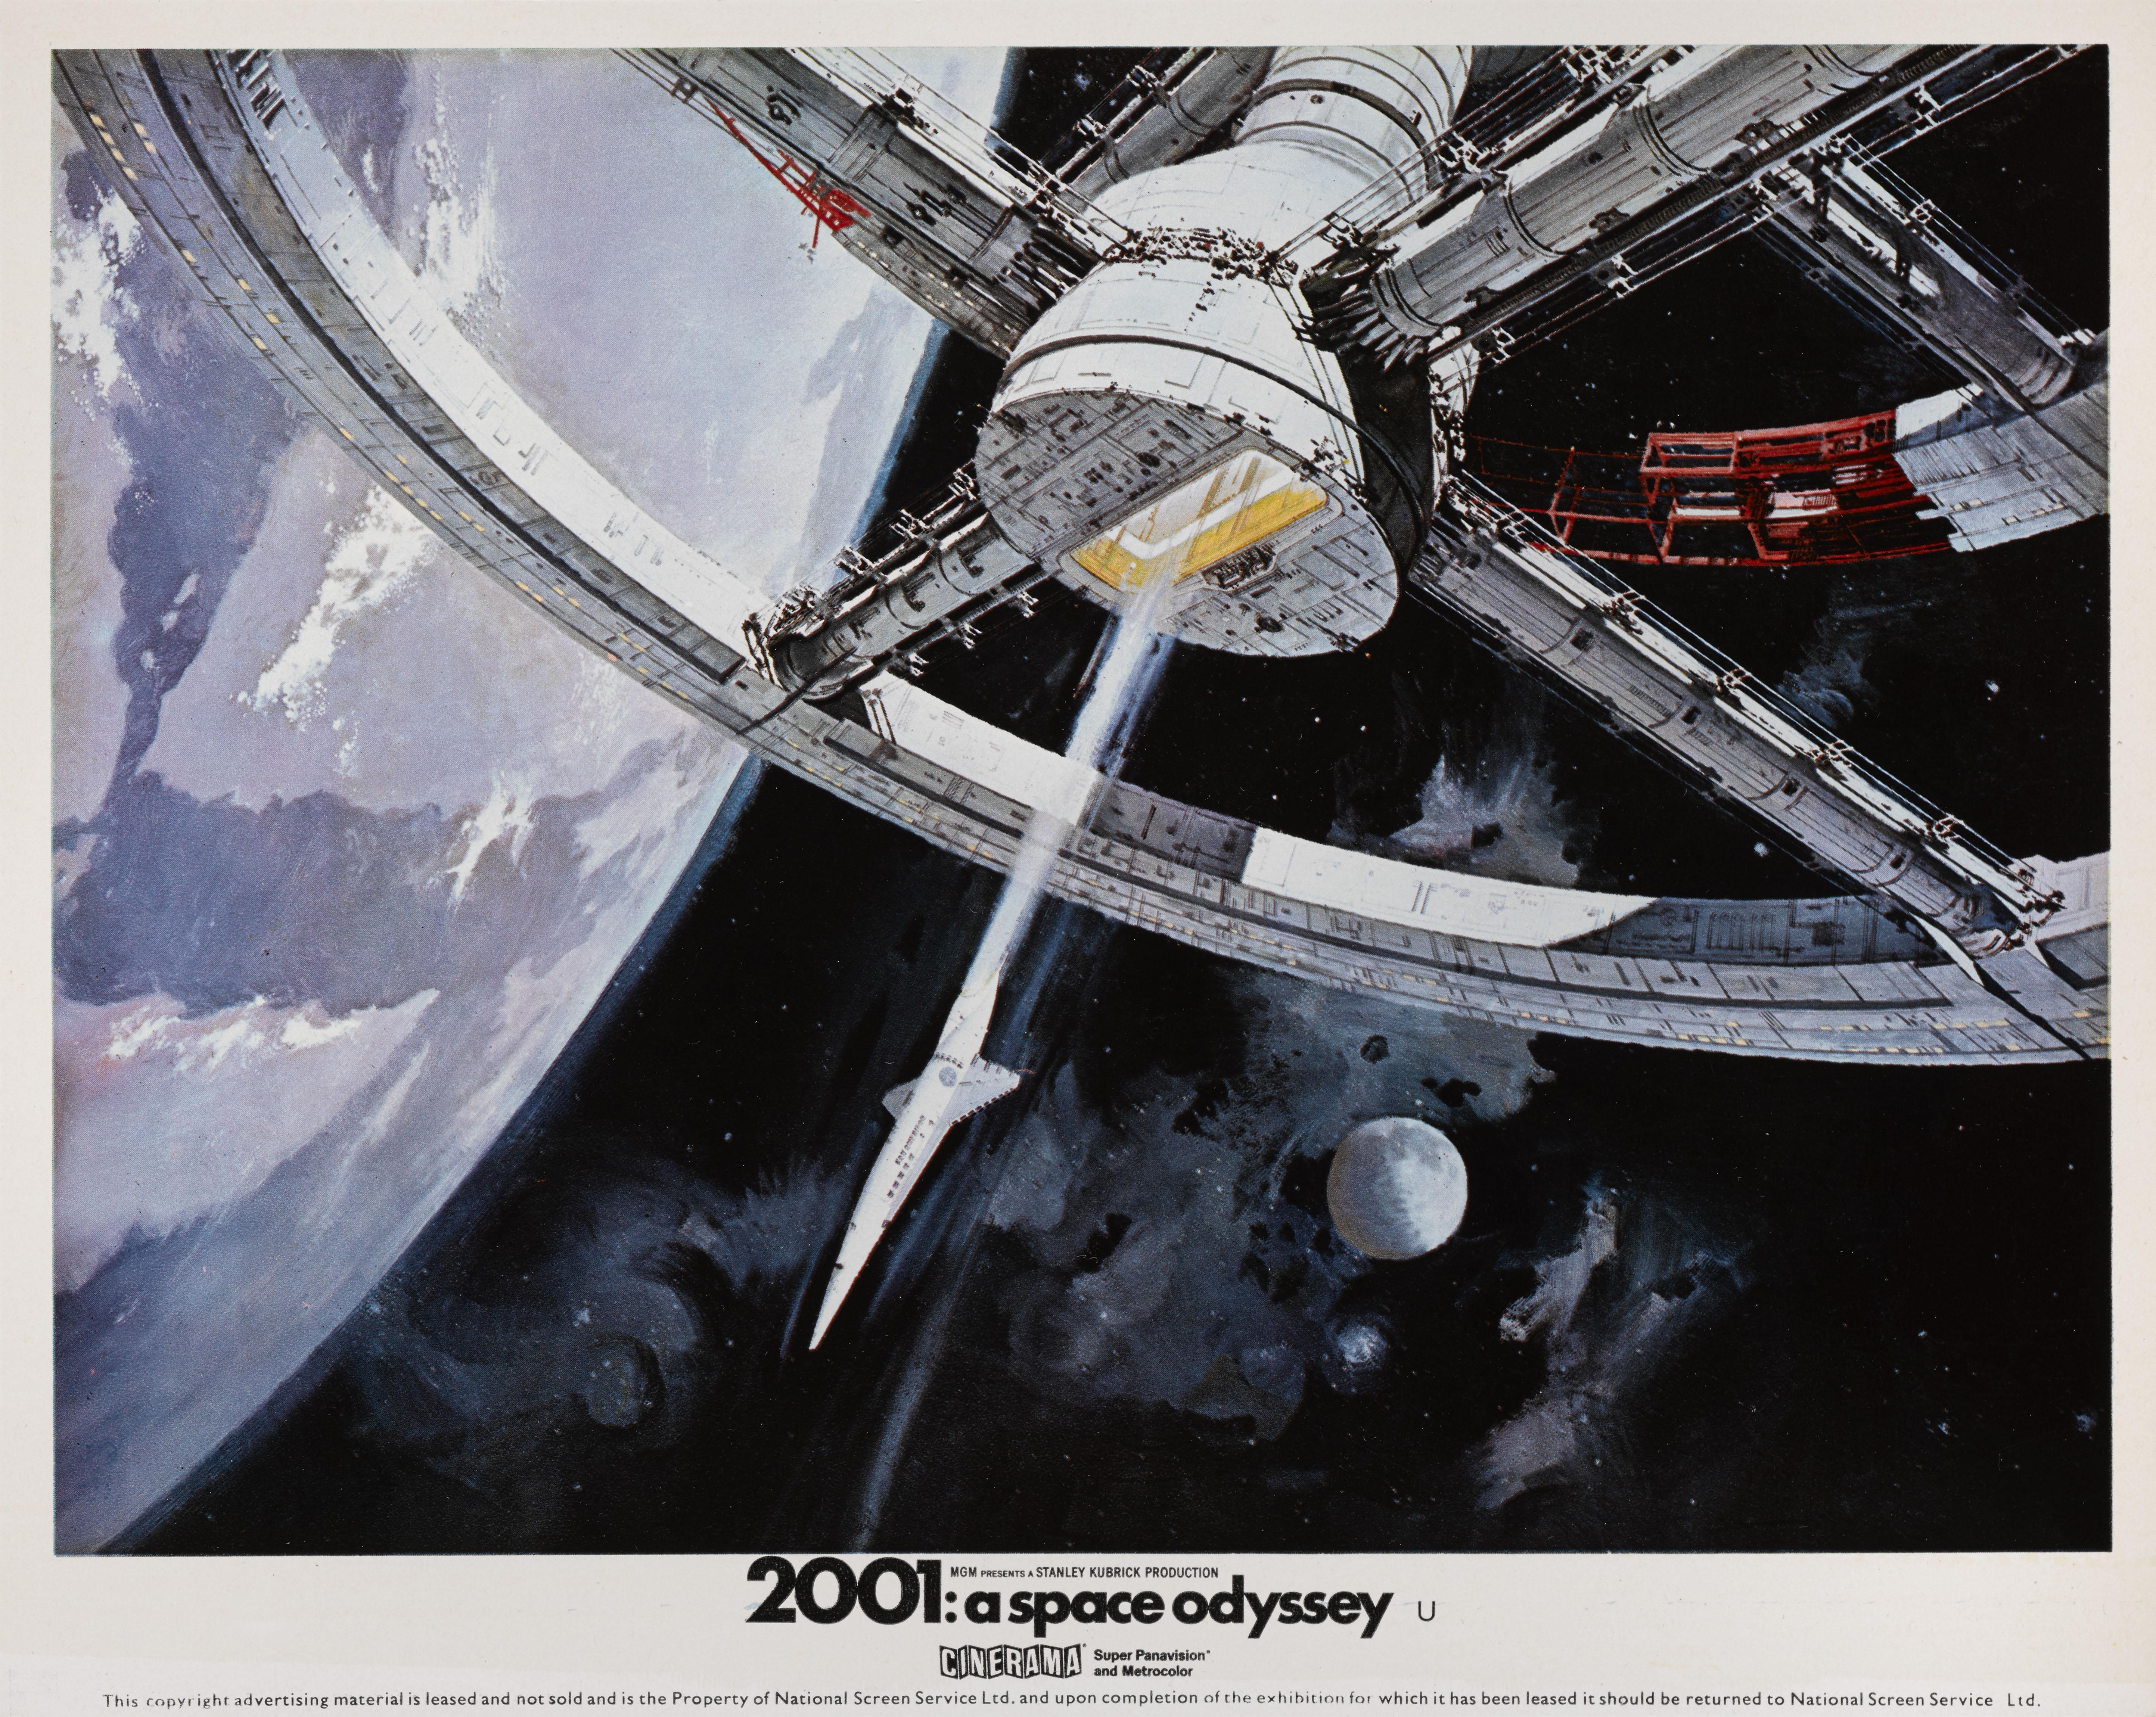 is 2001 a space odyssey in public domain